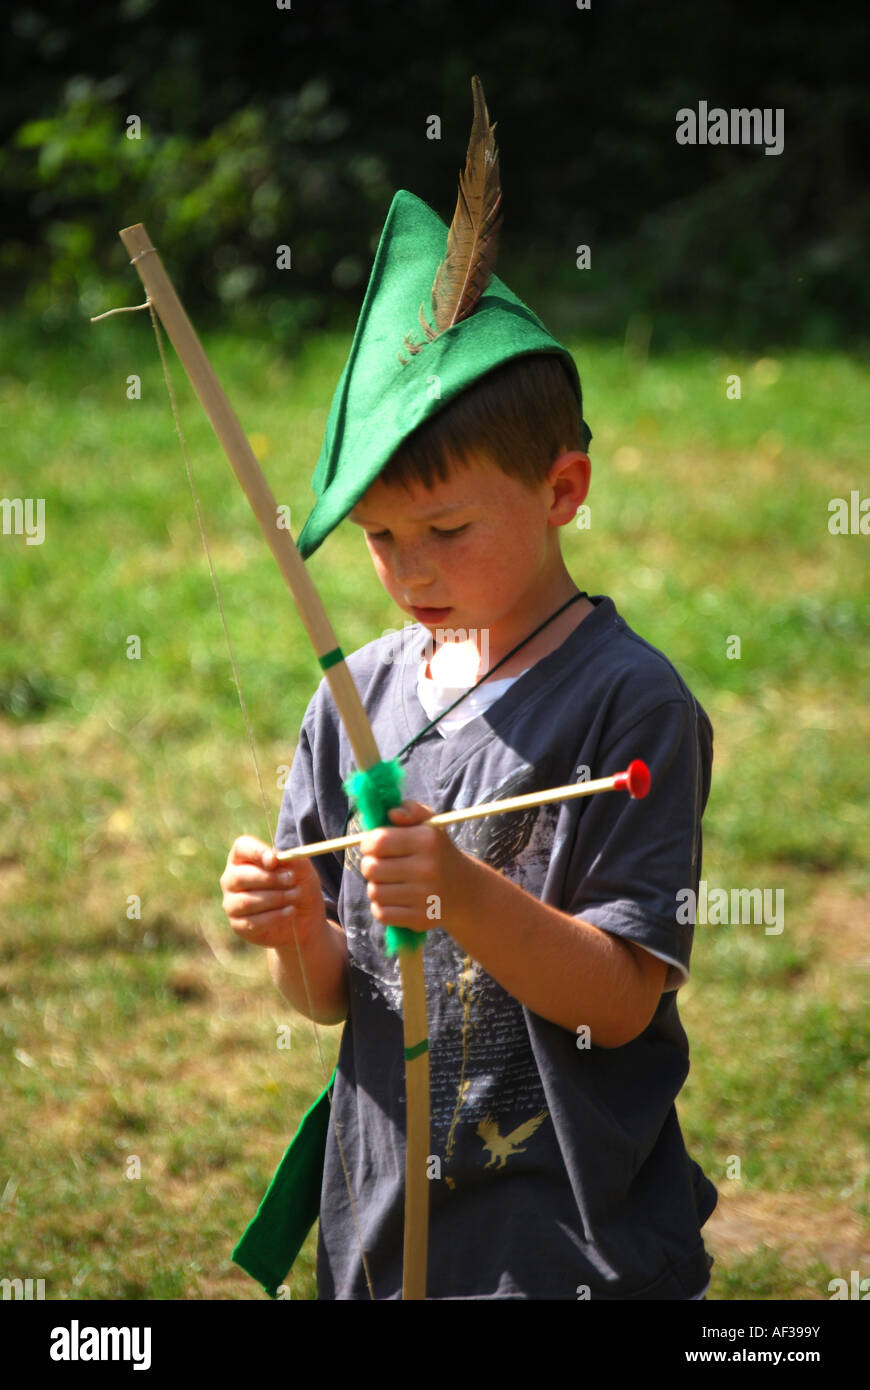 Boy with green hat and bow and arrow, Robin Hood Festival, Sherwood Forest, Nottinghamshire, England, United Kingdom Stock Photo